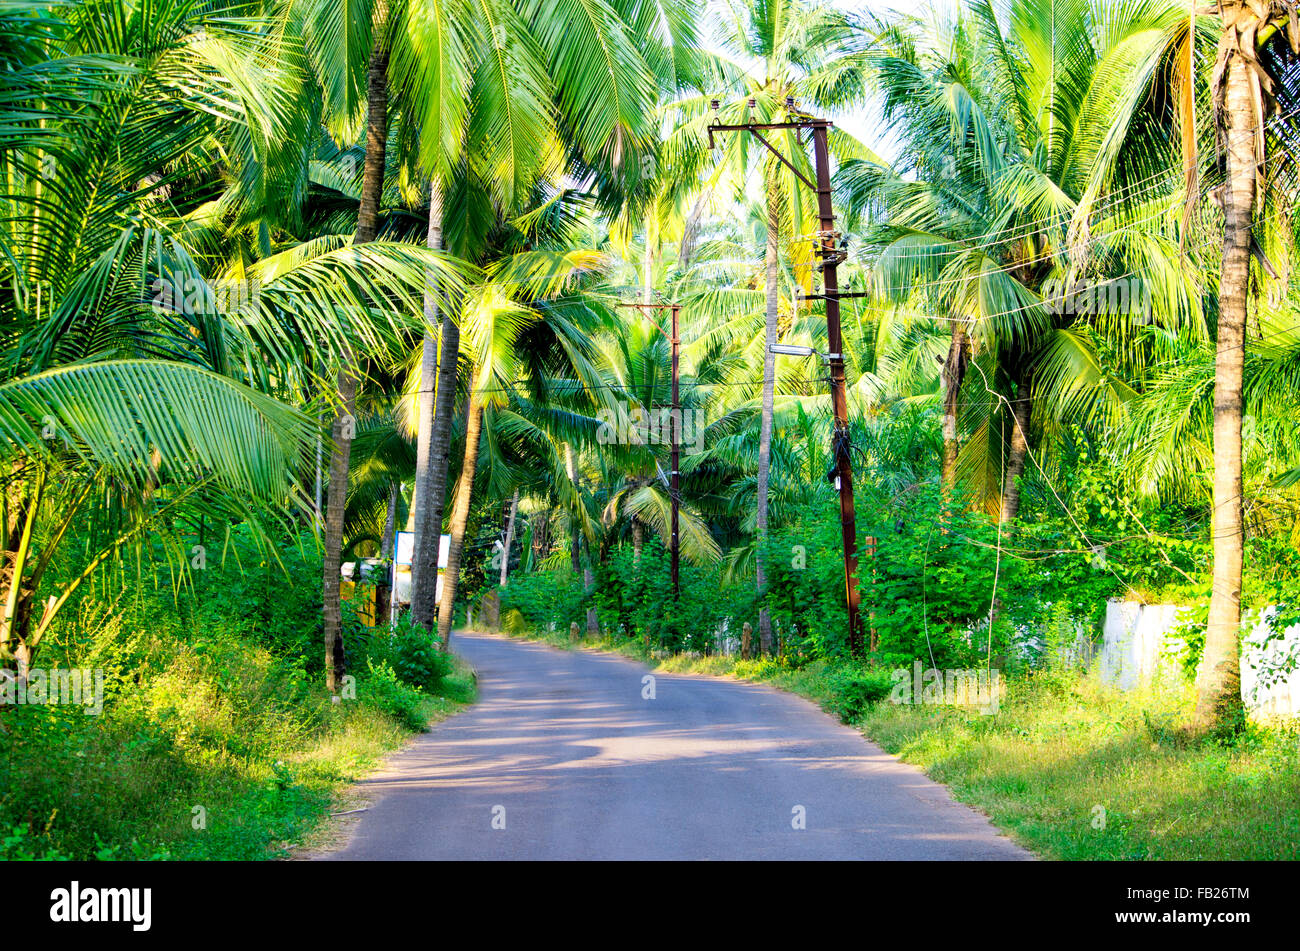 road in the village tropics the nature,the road,the street,the carriageway,asia,india,the indian village,palm trees,the road Stock Photo